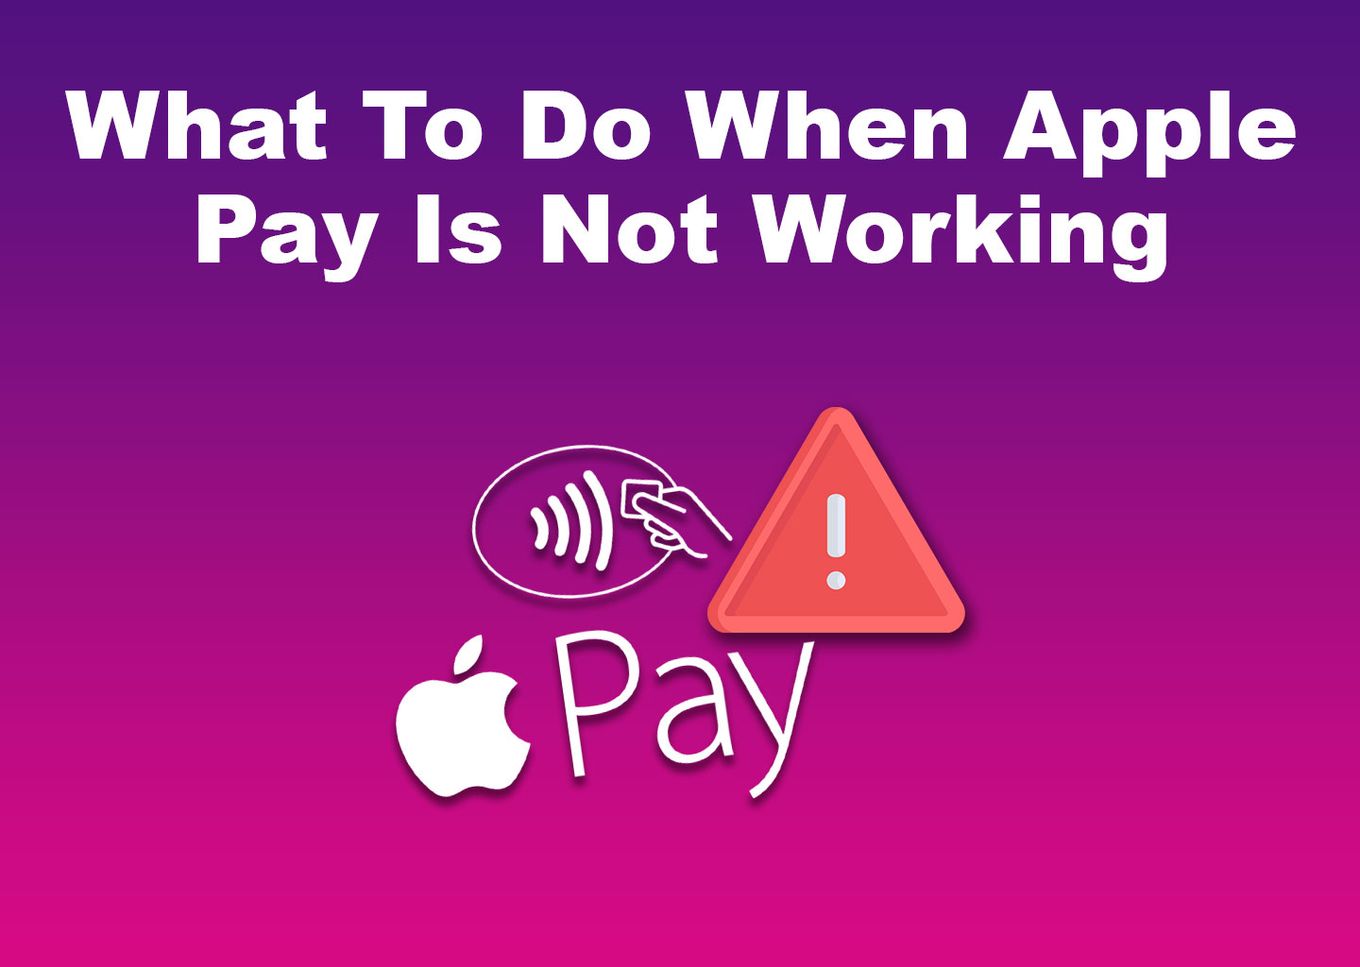 Check Your Card on Apple Pay